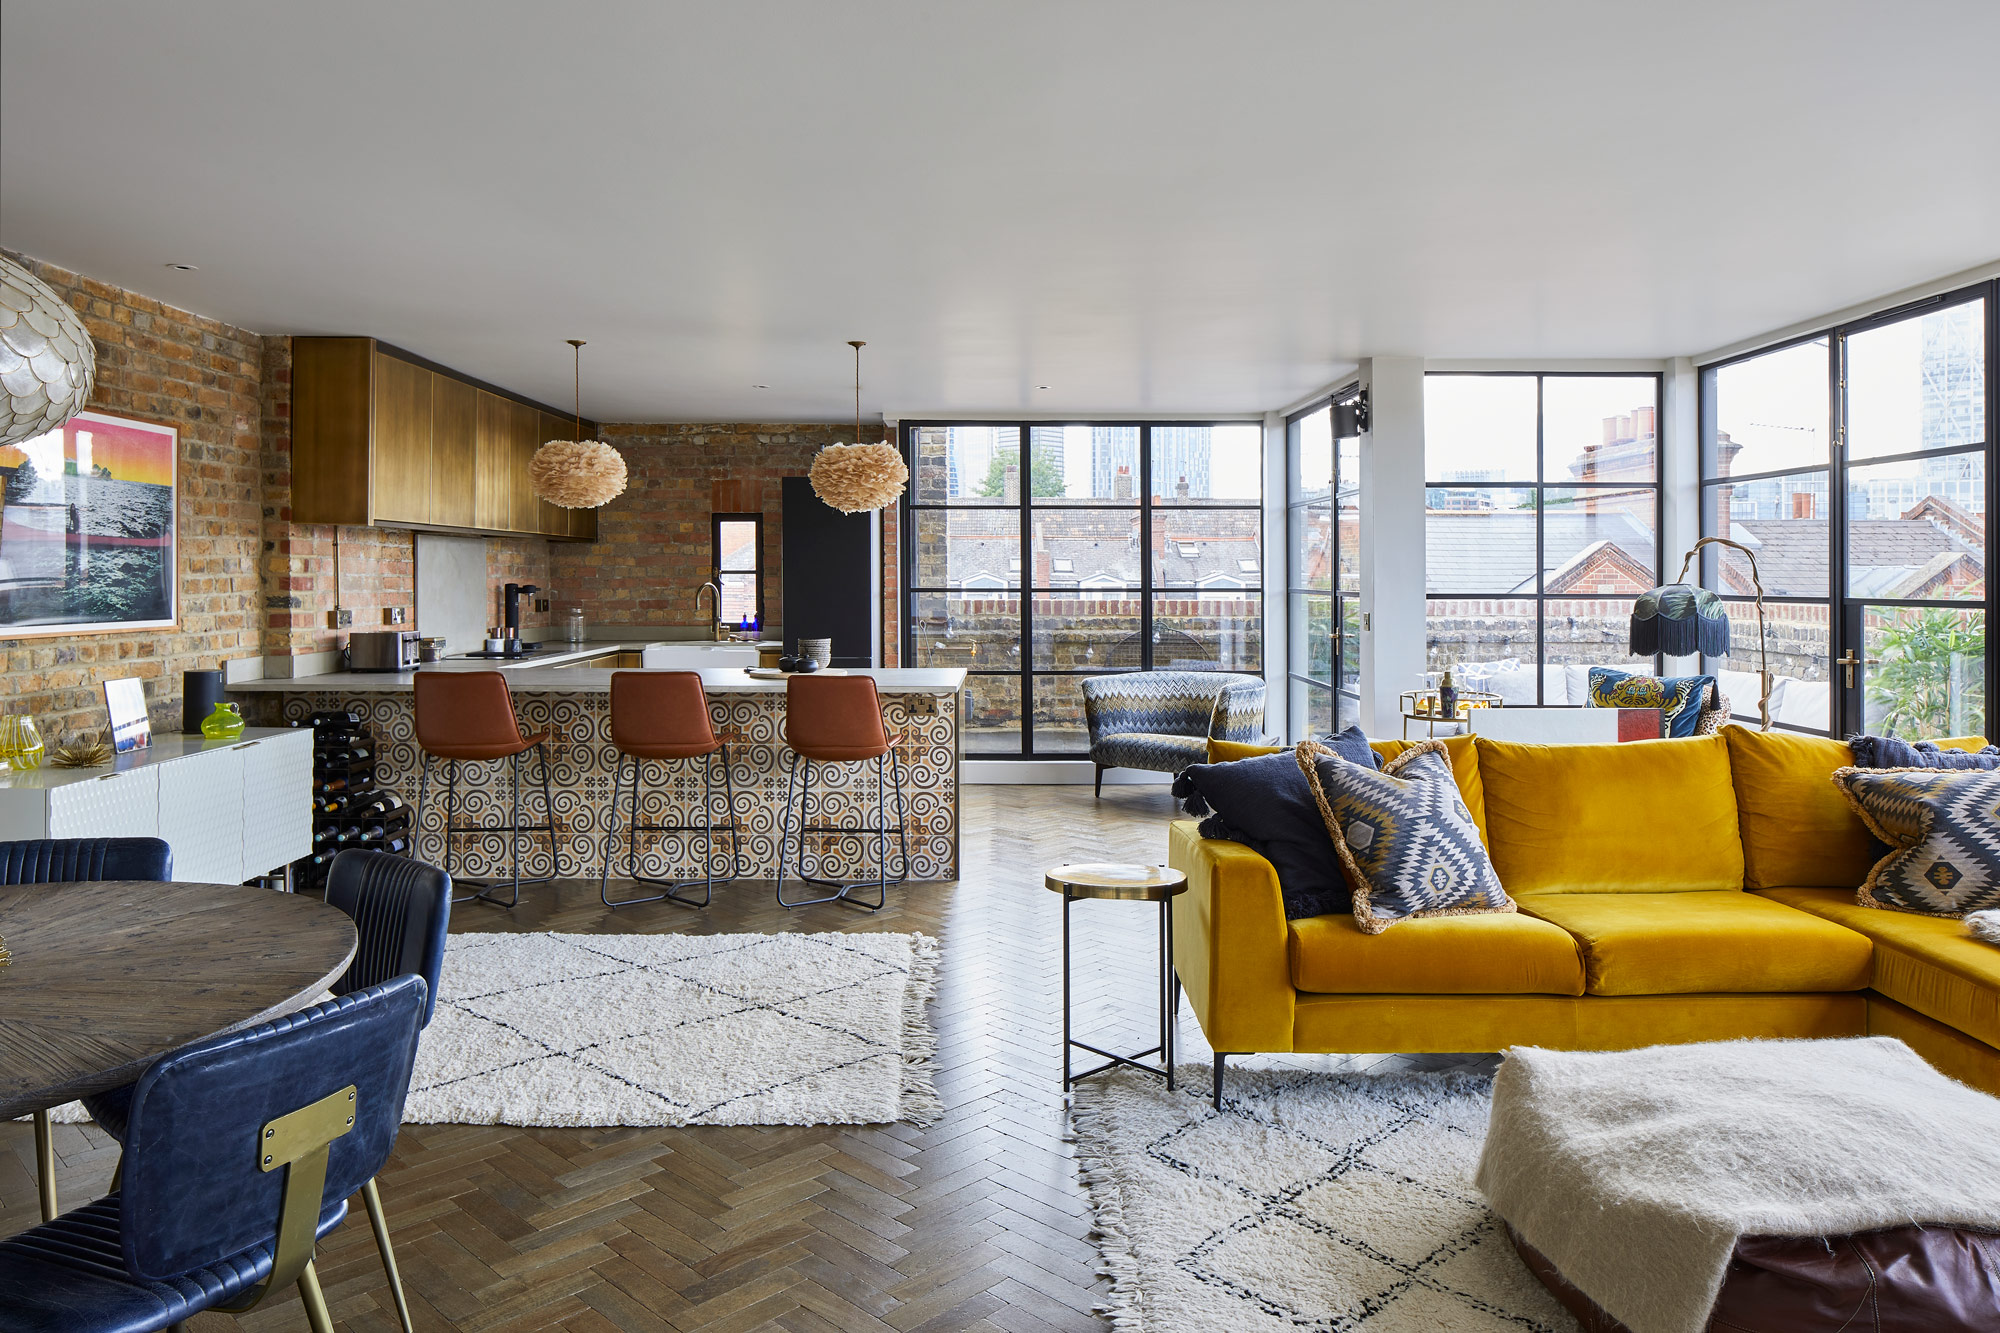 Open plan London flat with yellow sofa and metal kitchen